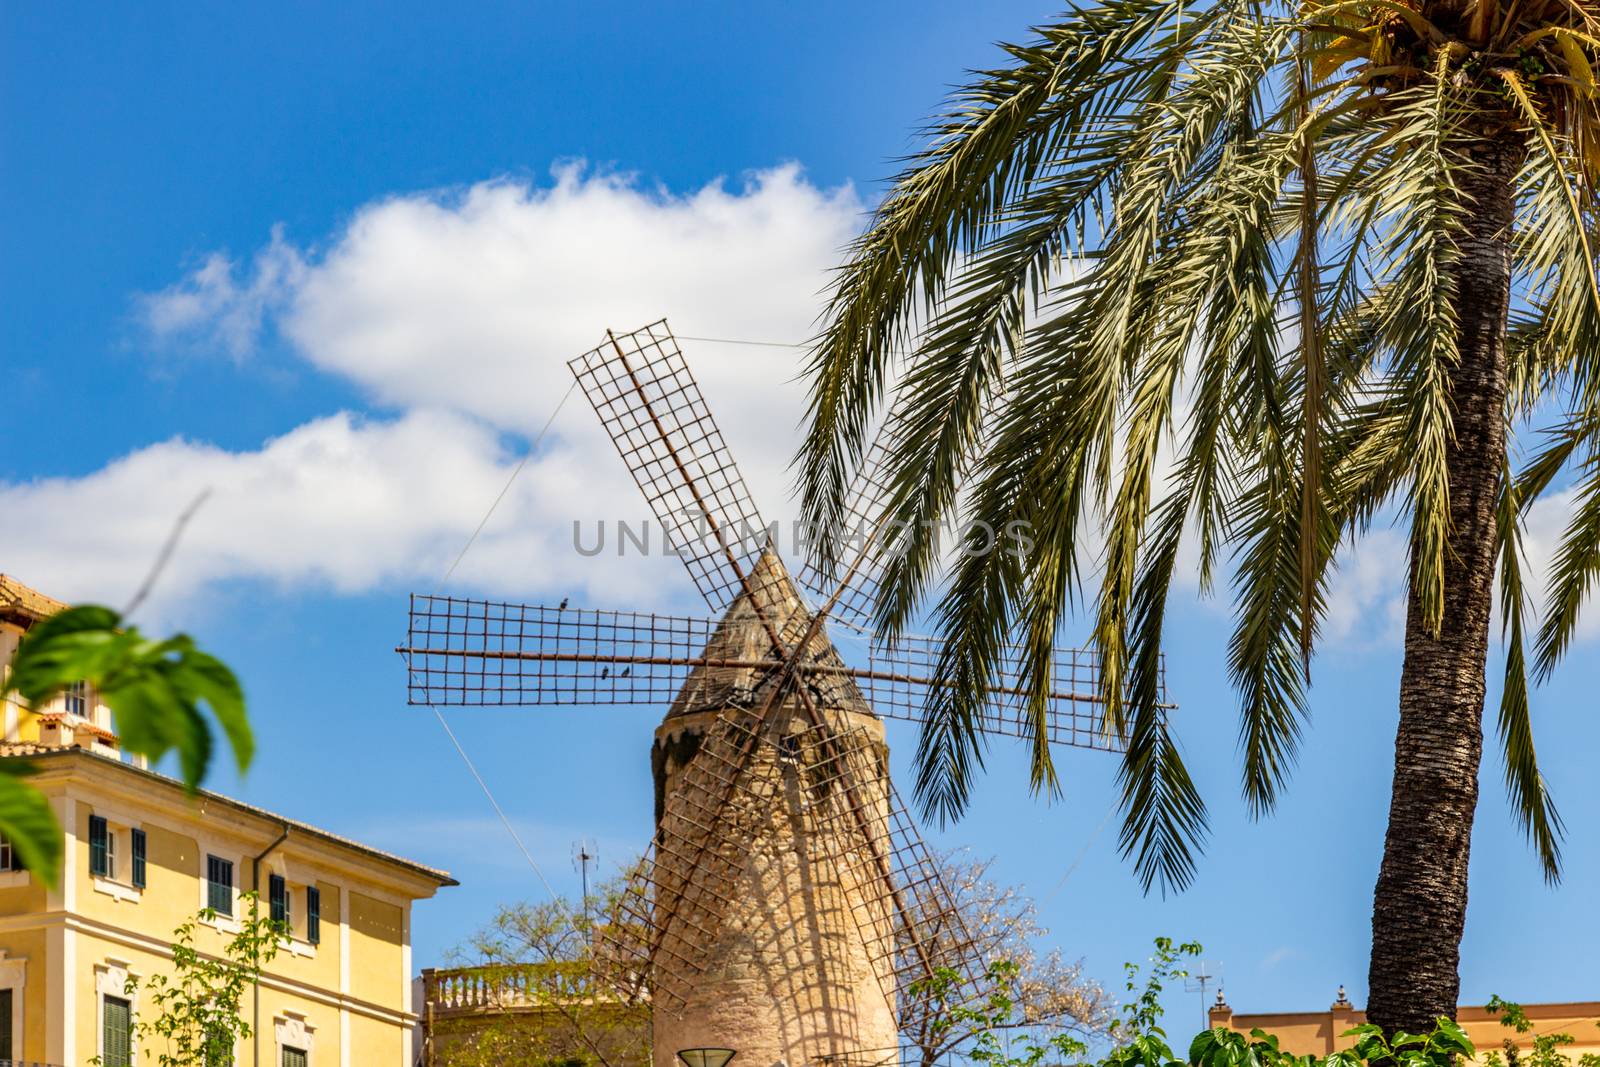 Windmill in Palma on balearic island Mallorca, Spain on a sunny day with palm trees in front